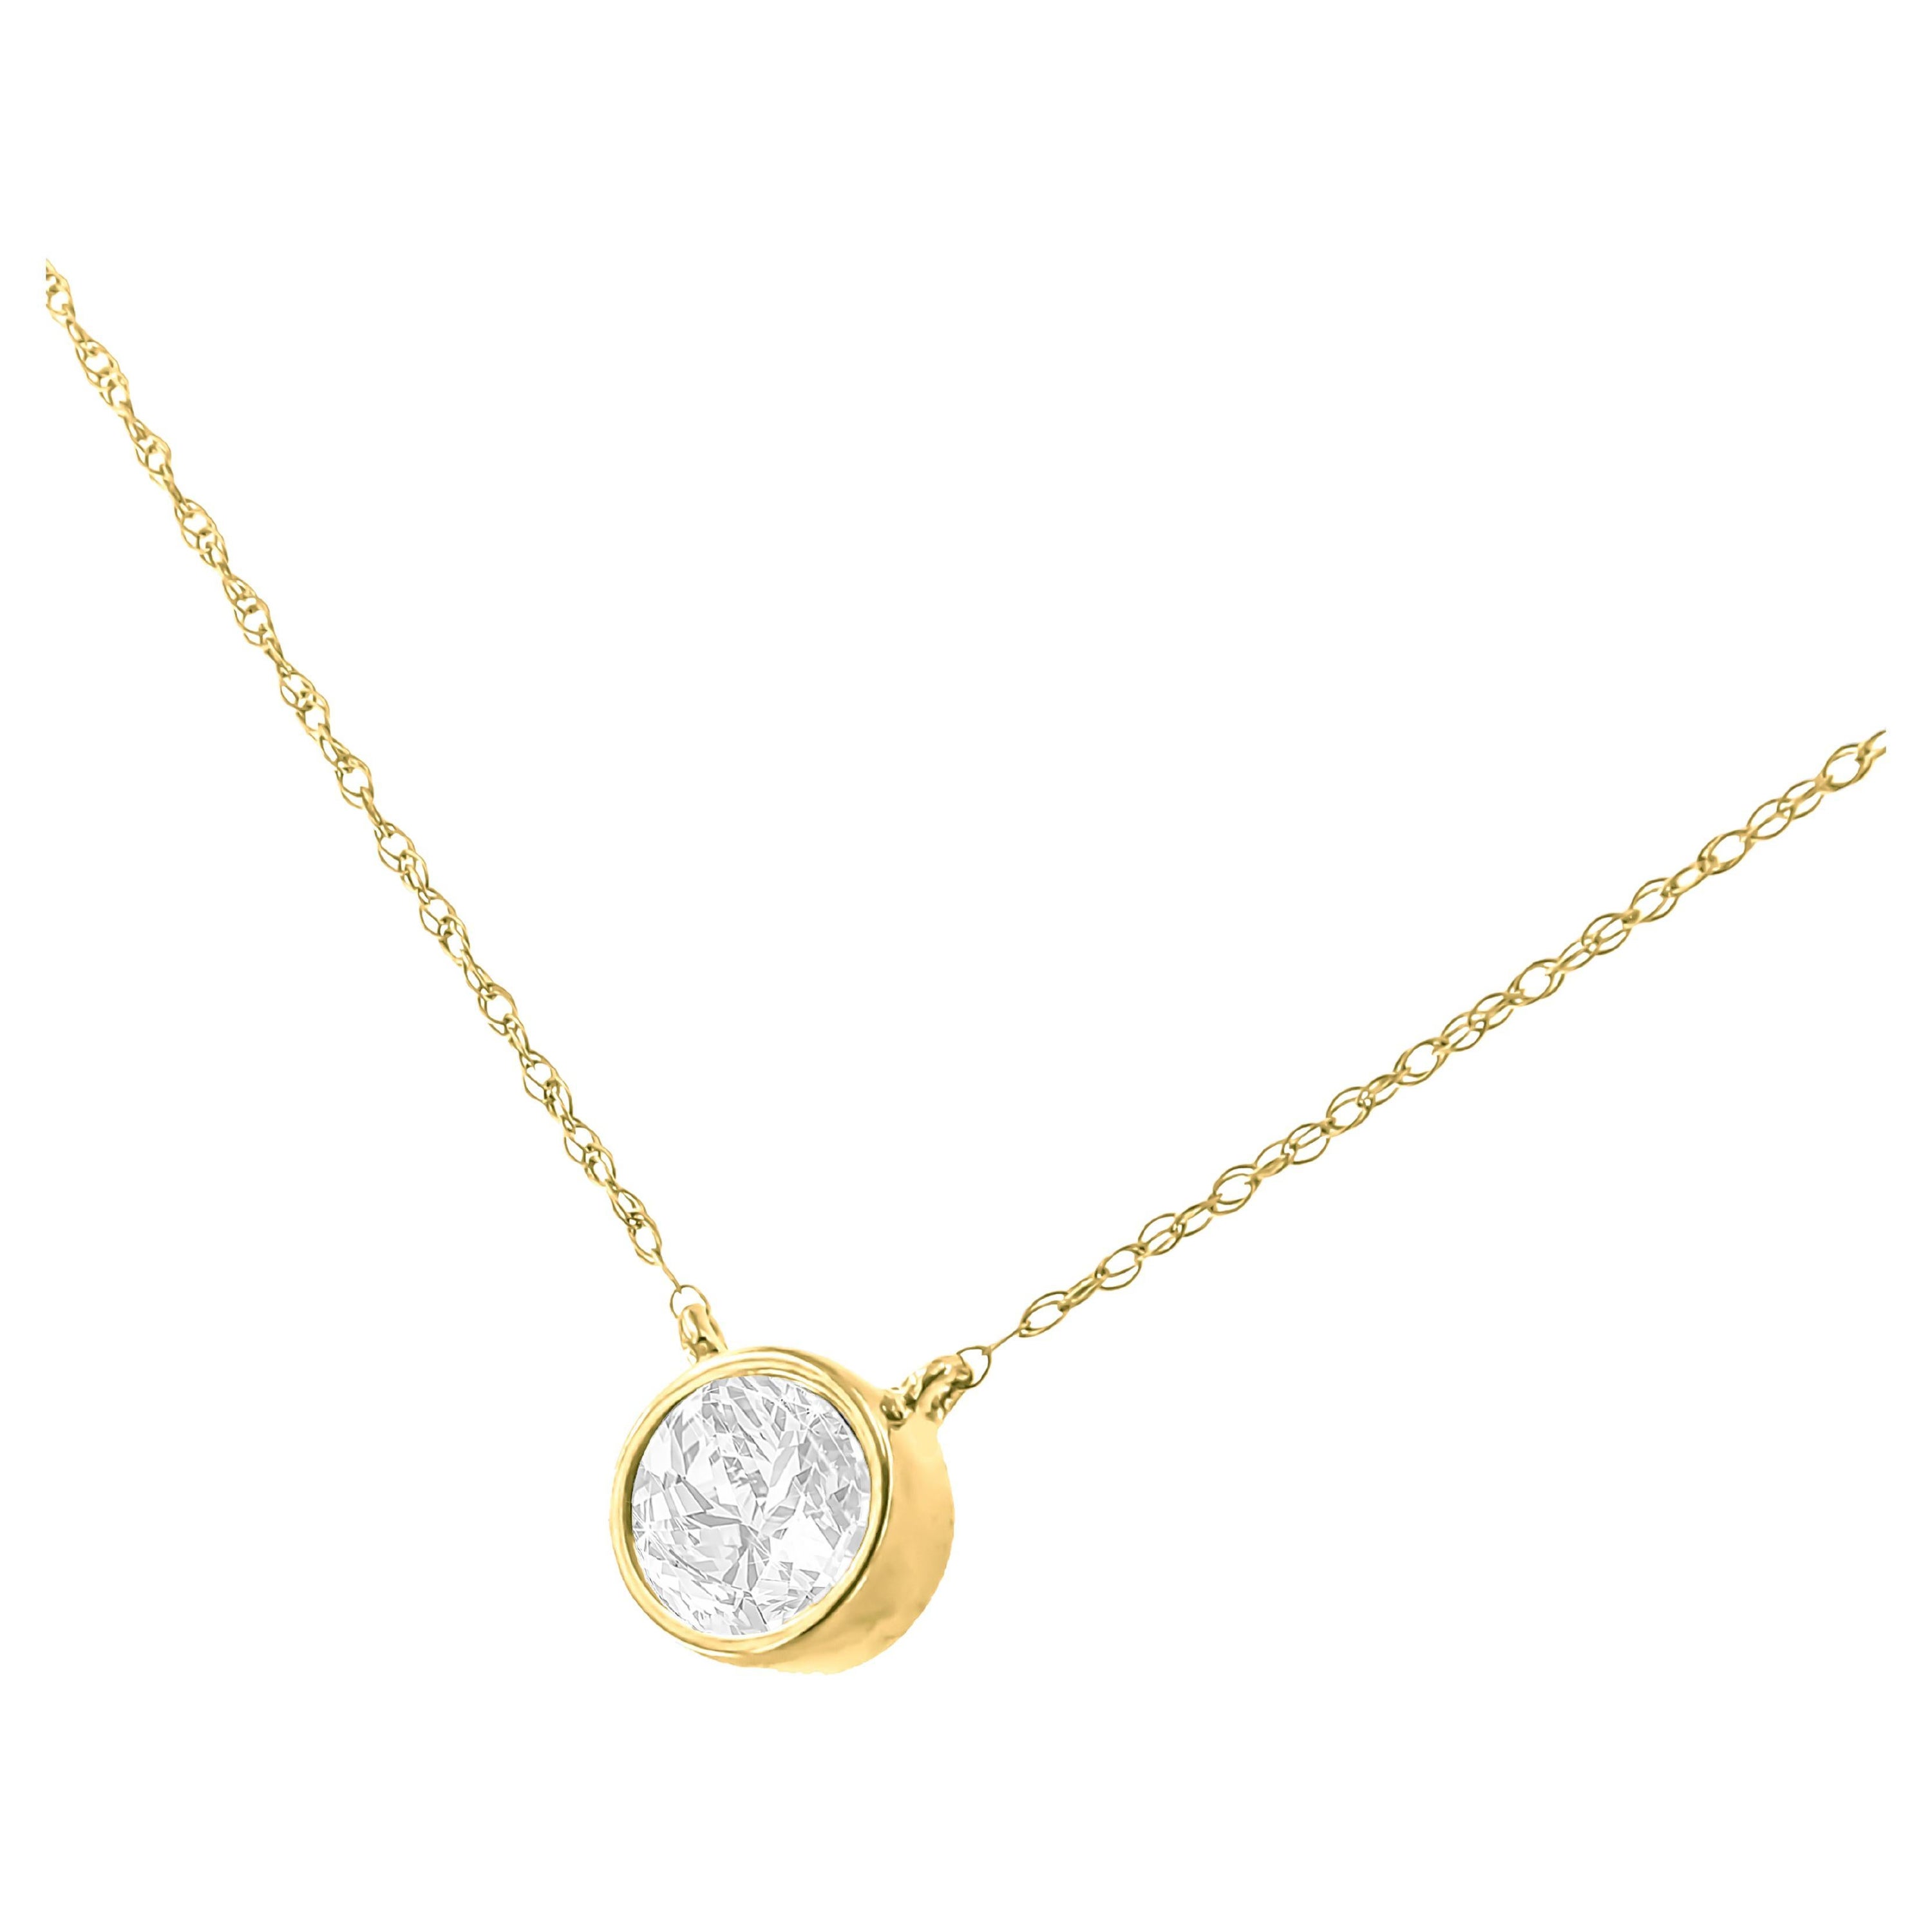 14K Yellow Gold Plated .925 Sterling Silver 1/2 Carat Diamond Pendant Necklace